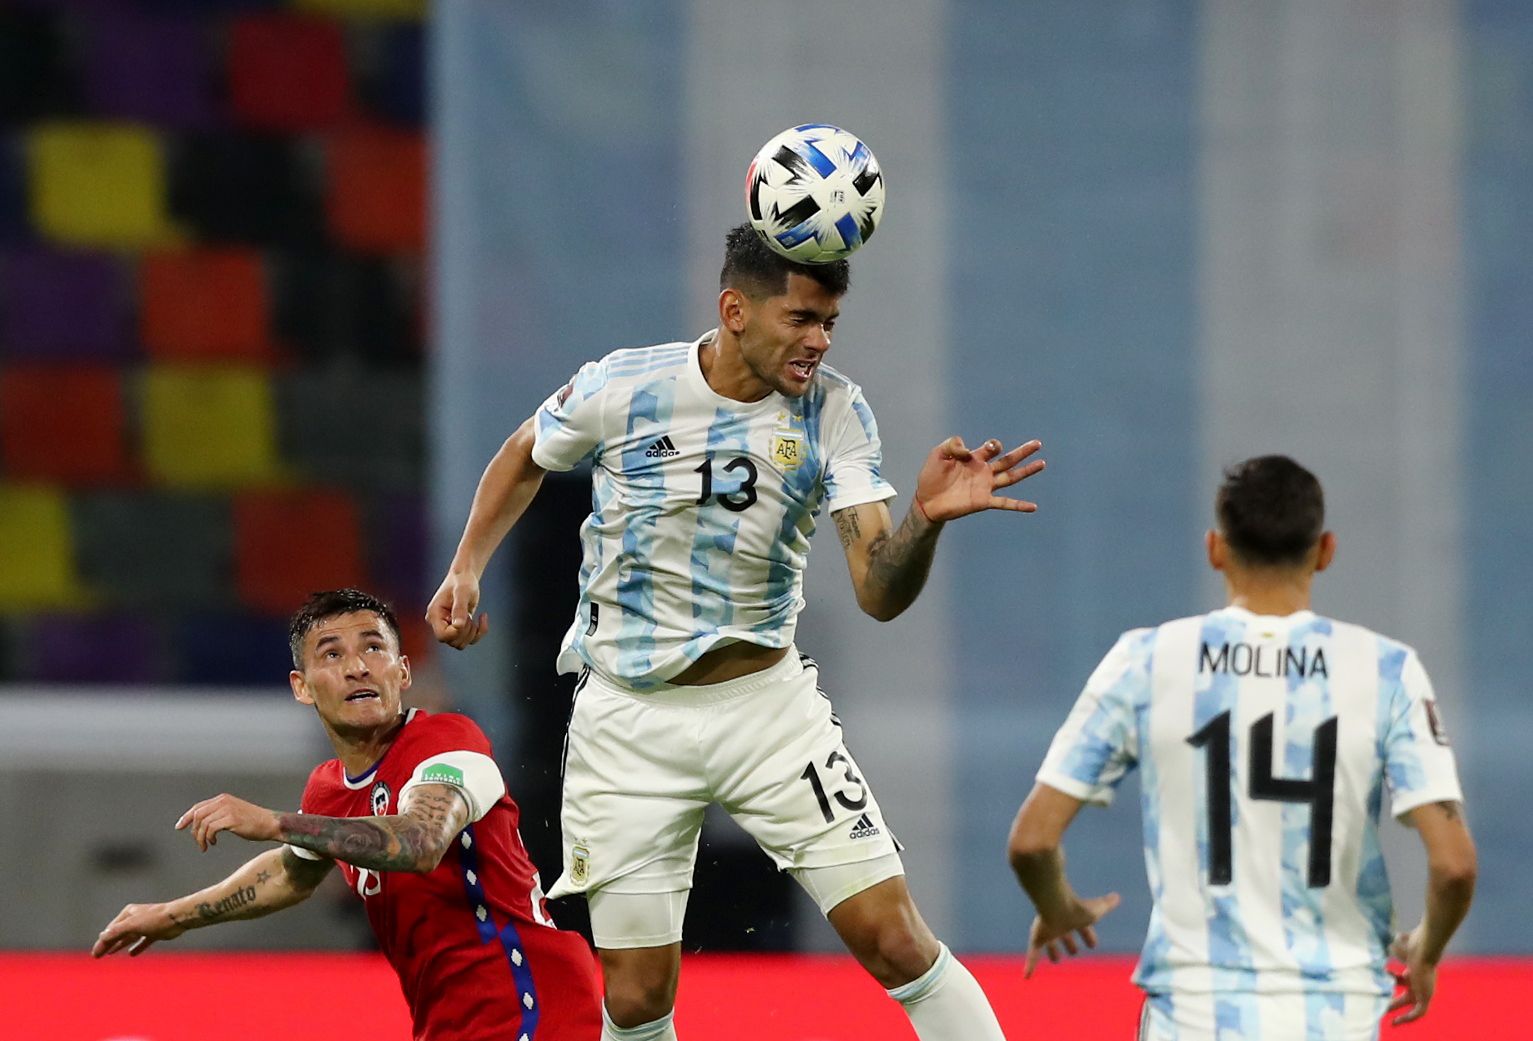 Soccer Football - World Cup - South American Qualifiers - Argentina v Chile - Estadio Unico, Santiago del Estero, Argentina - June 3, 2021 Argentina's Cristian Romero in action with Chile's Charles Aranguiz POOL via REUTERS/Agustin Marcarian